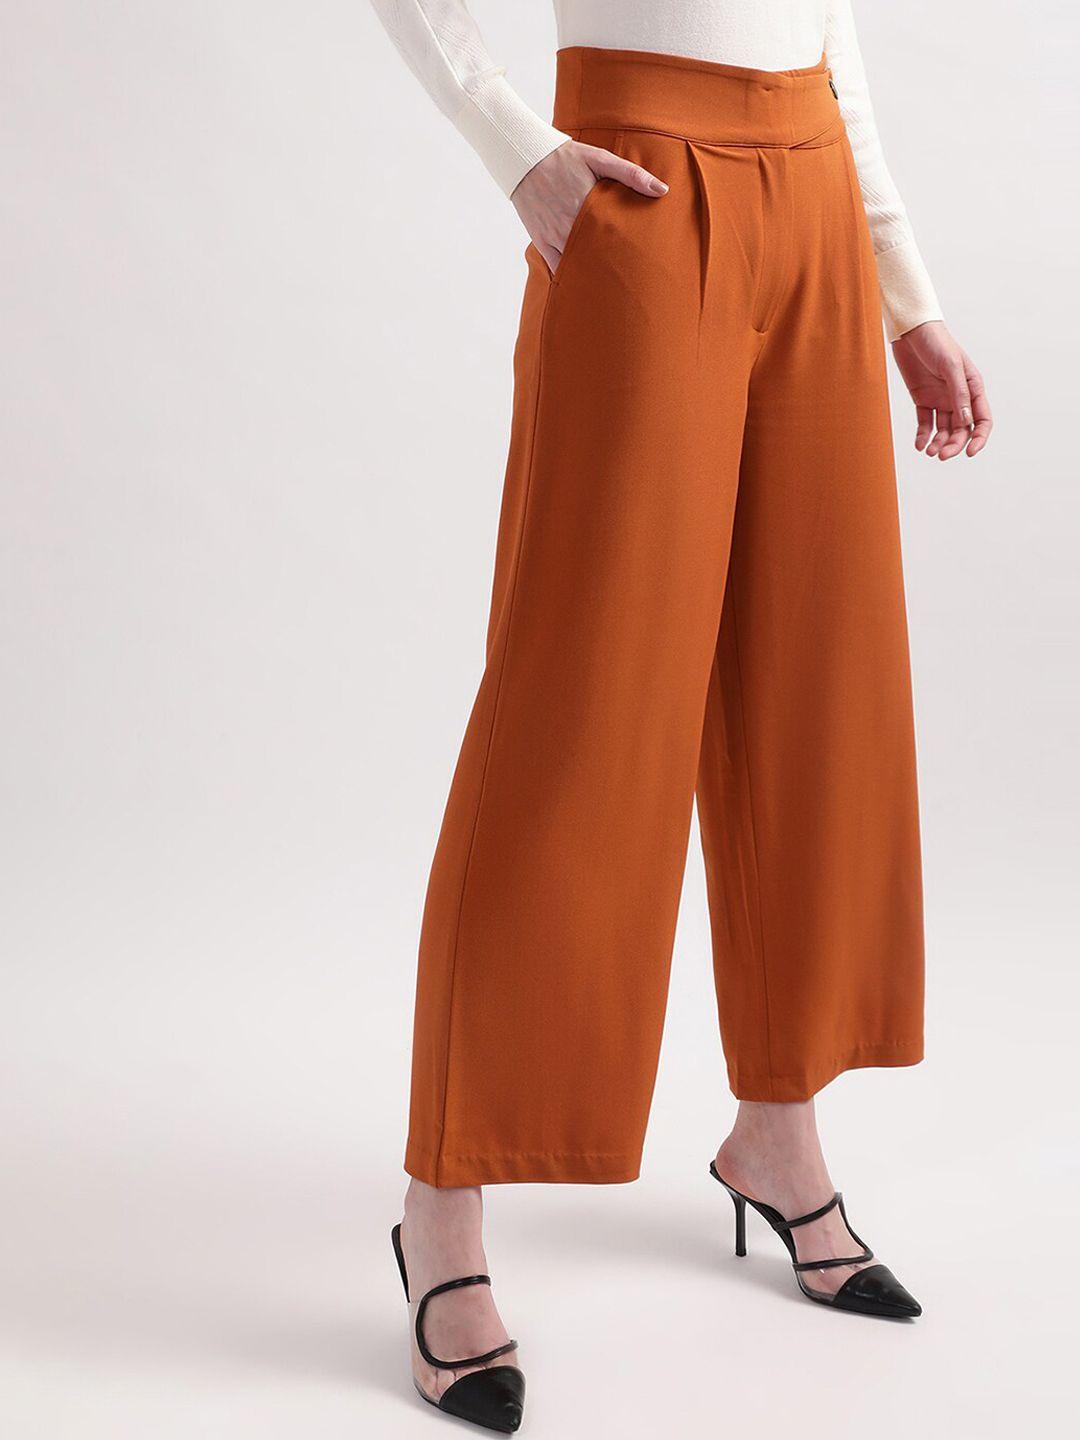 centrestage-women-mustard-yellow-flared-pleated-trousers